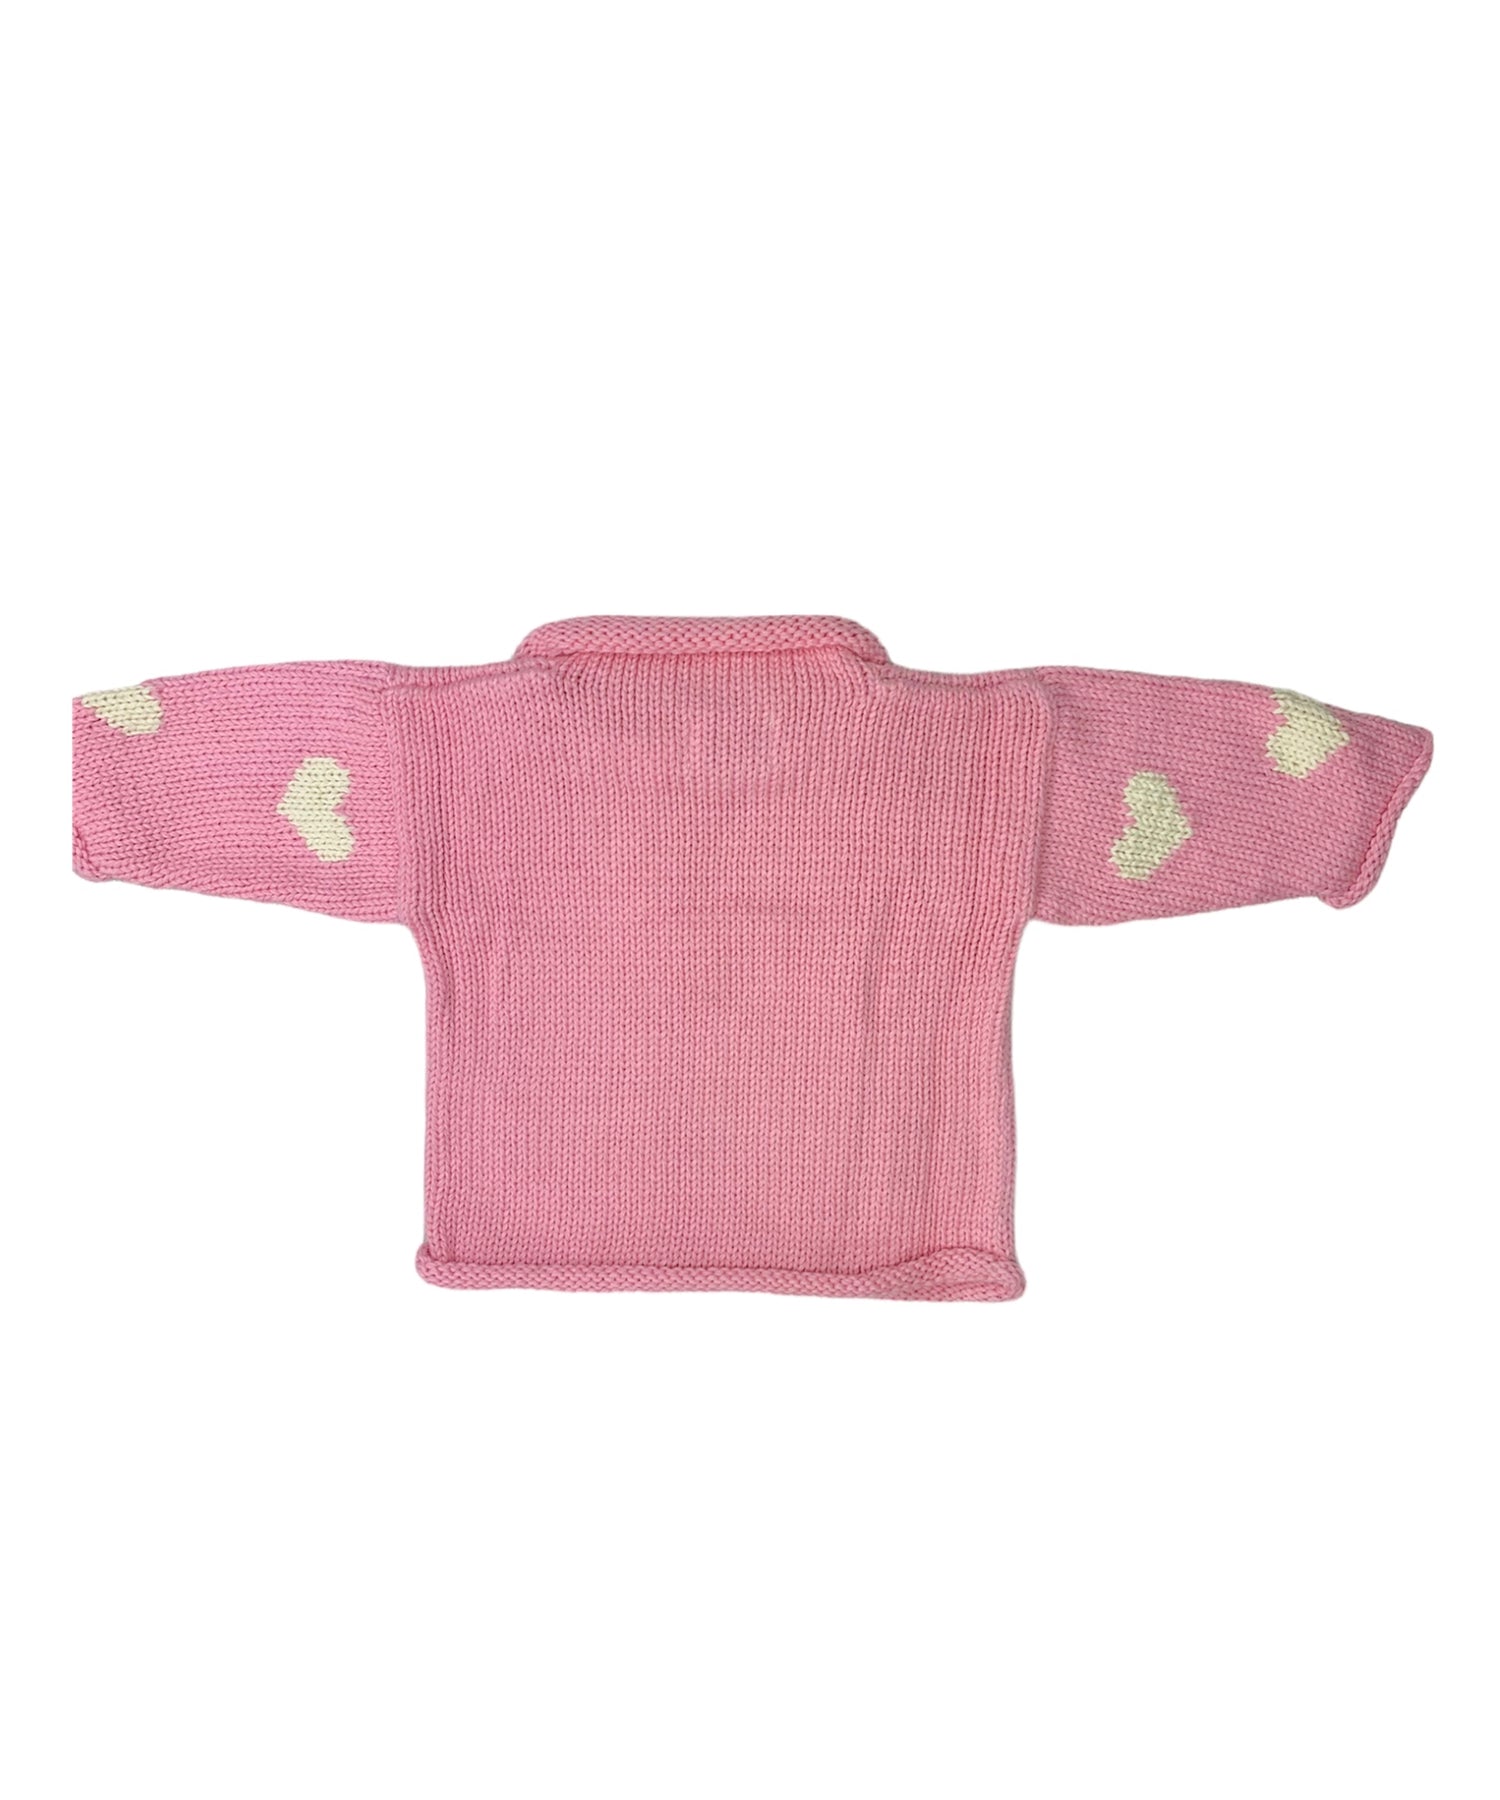 back of sweater plain pink